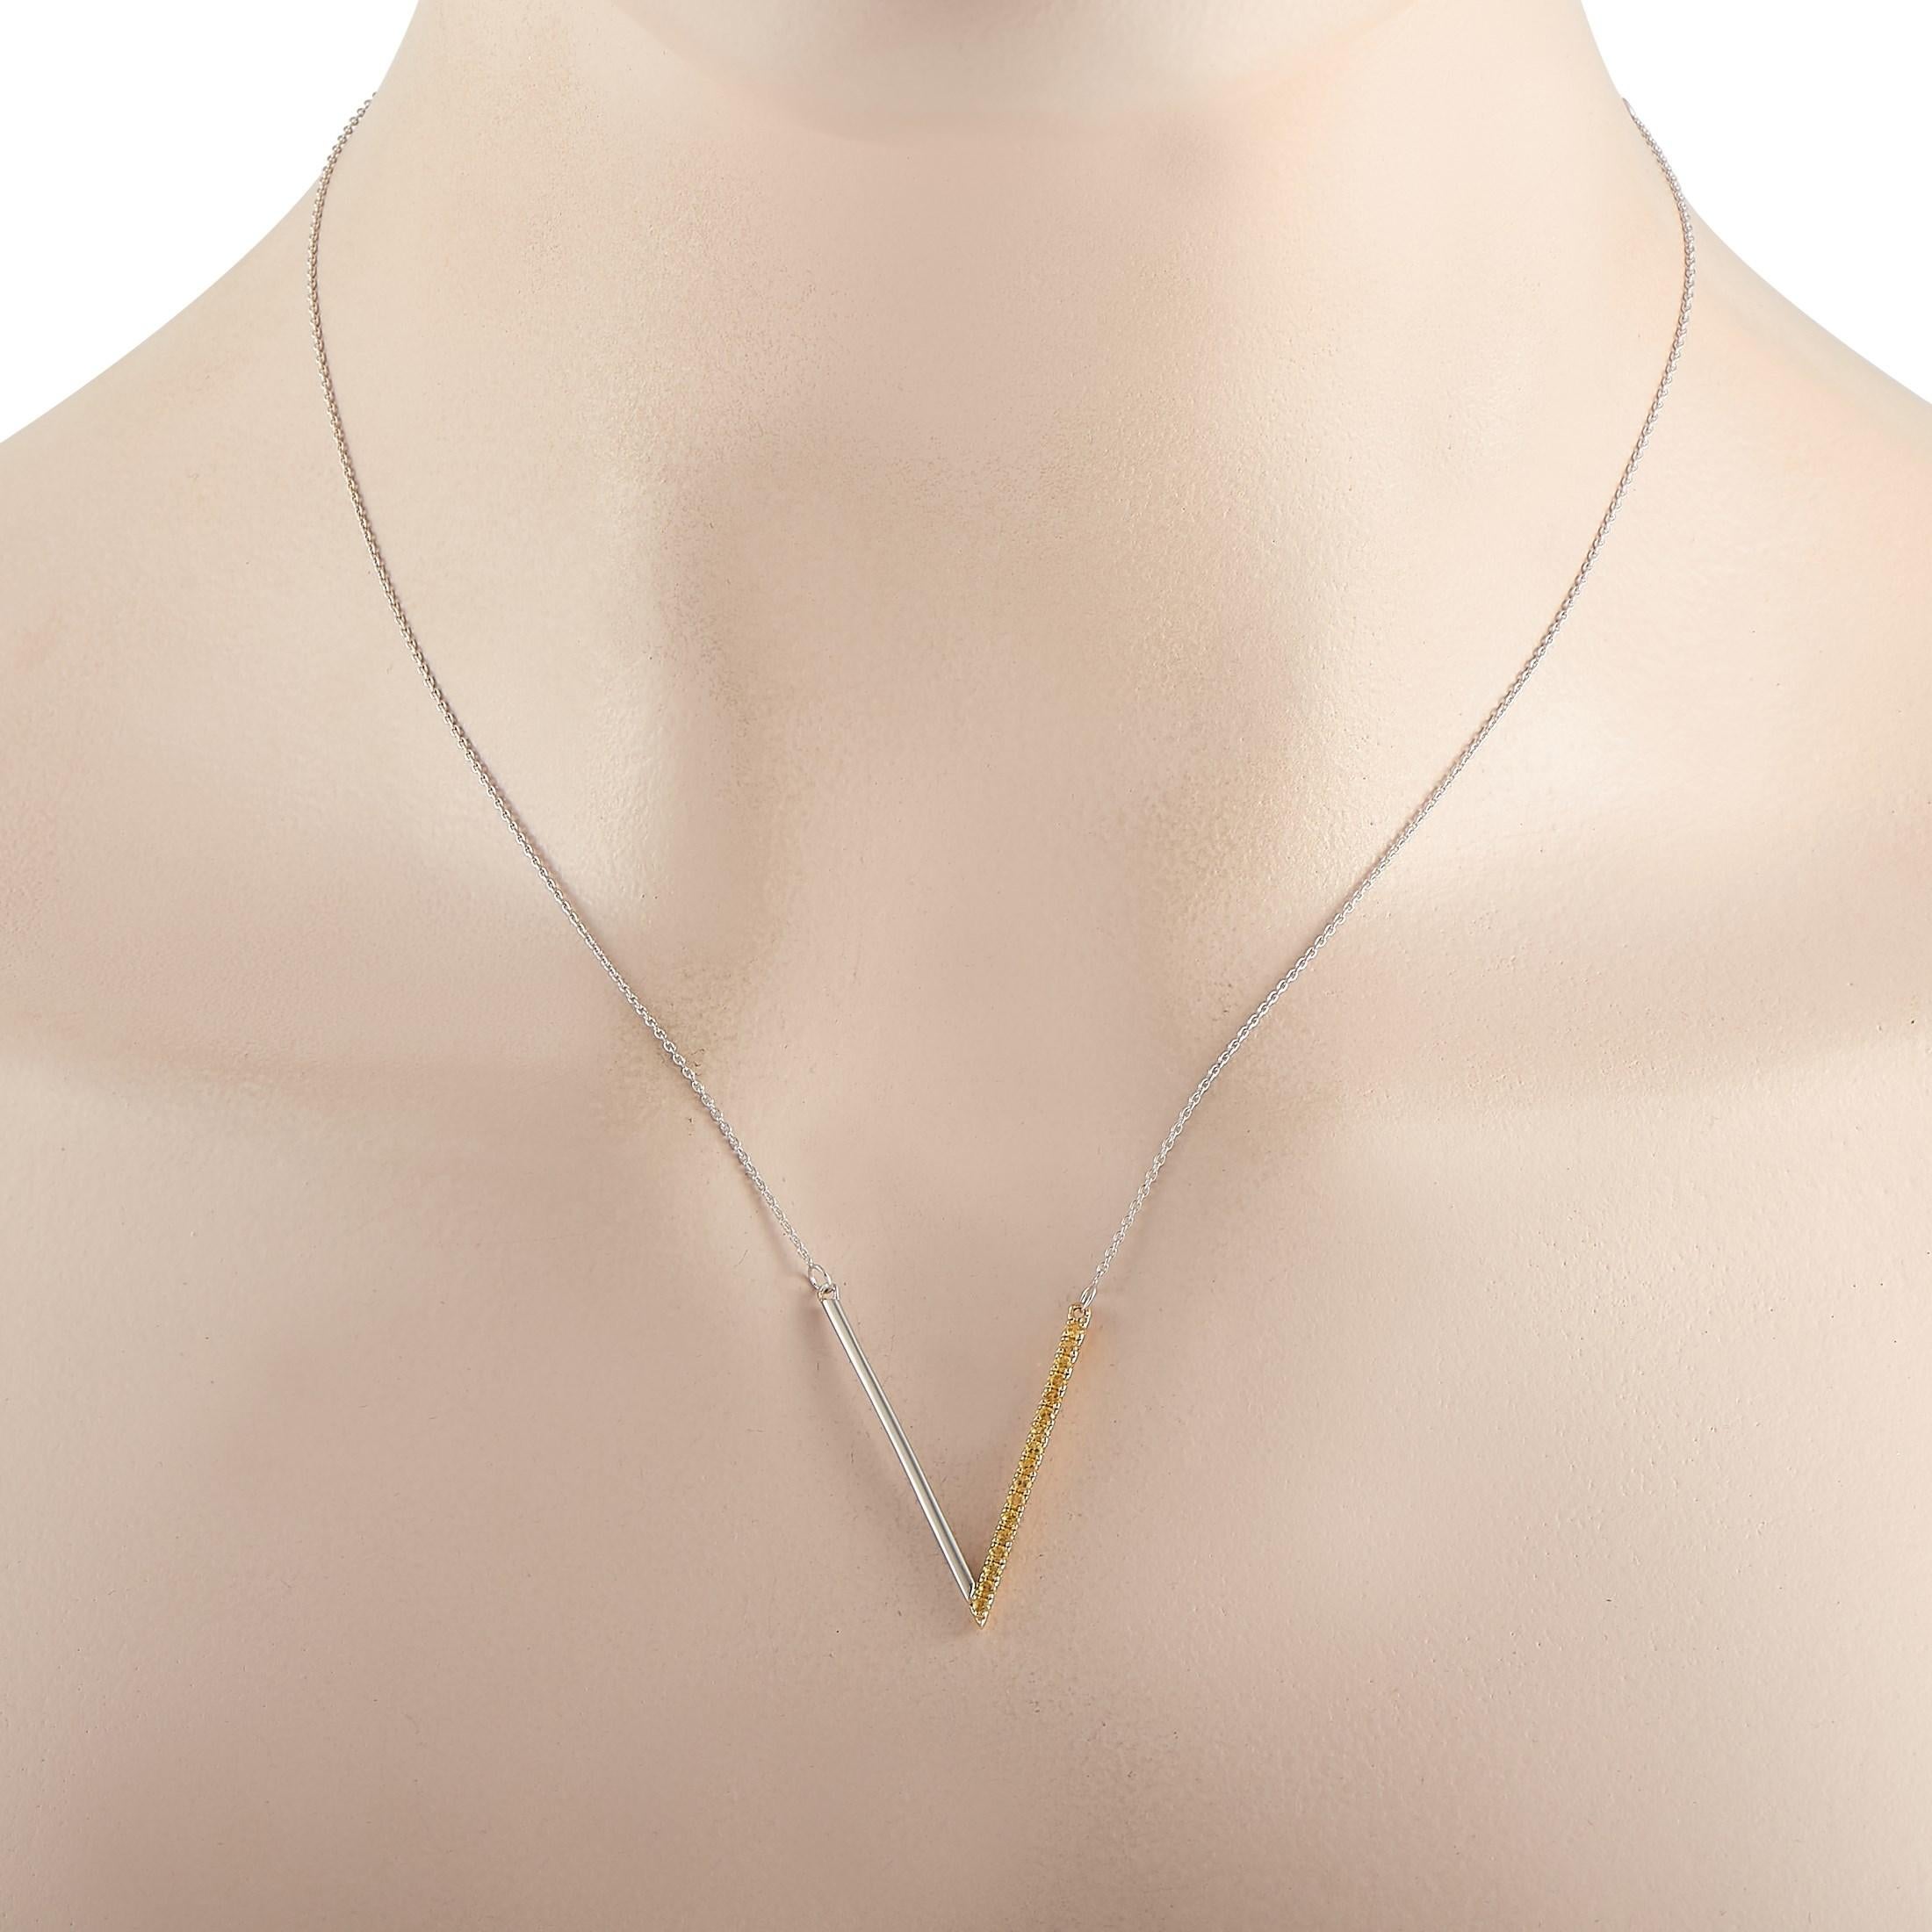 This unique LB Exclusive 14K White Gold 0.29 ct Yellow Sapphire V Pendant Necklace is a subtle statement piece that includes a delicate 14K White Gold chain that is 17 inches in length and features a lobster clasp. The necklace includes a matching